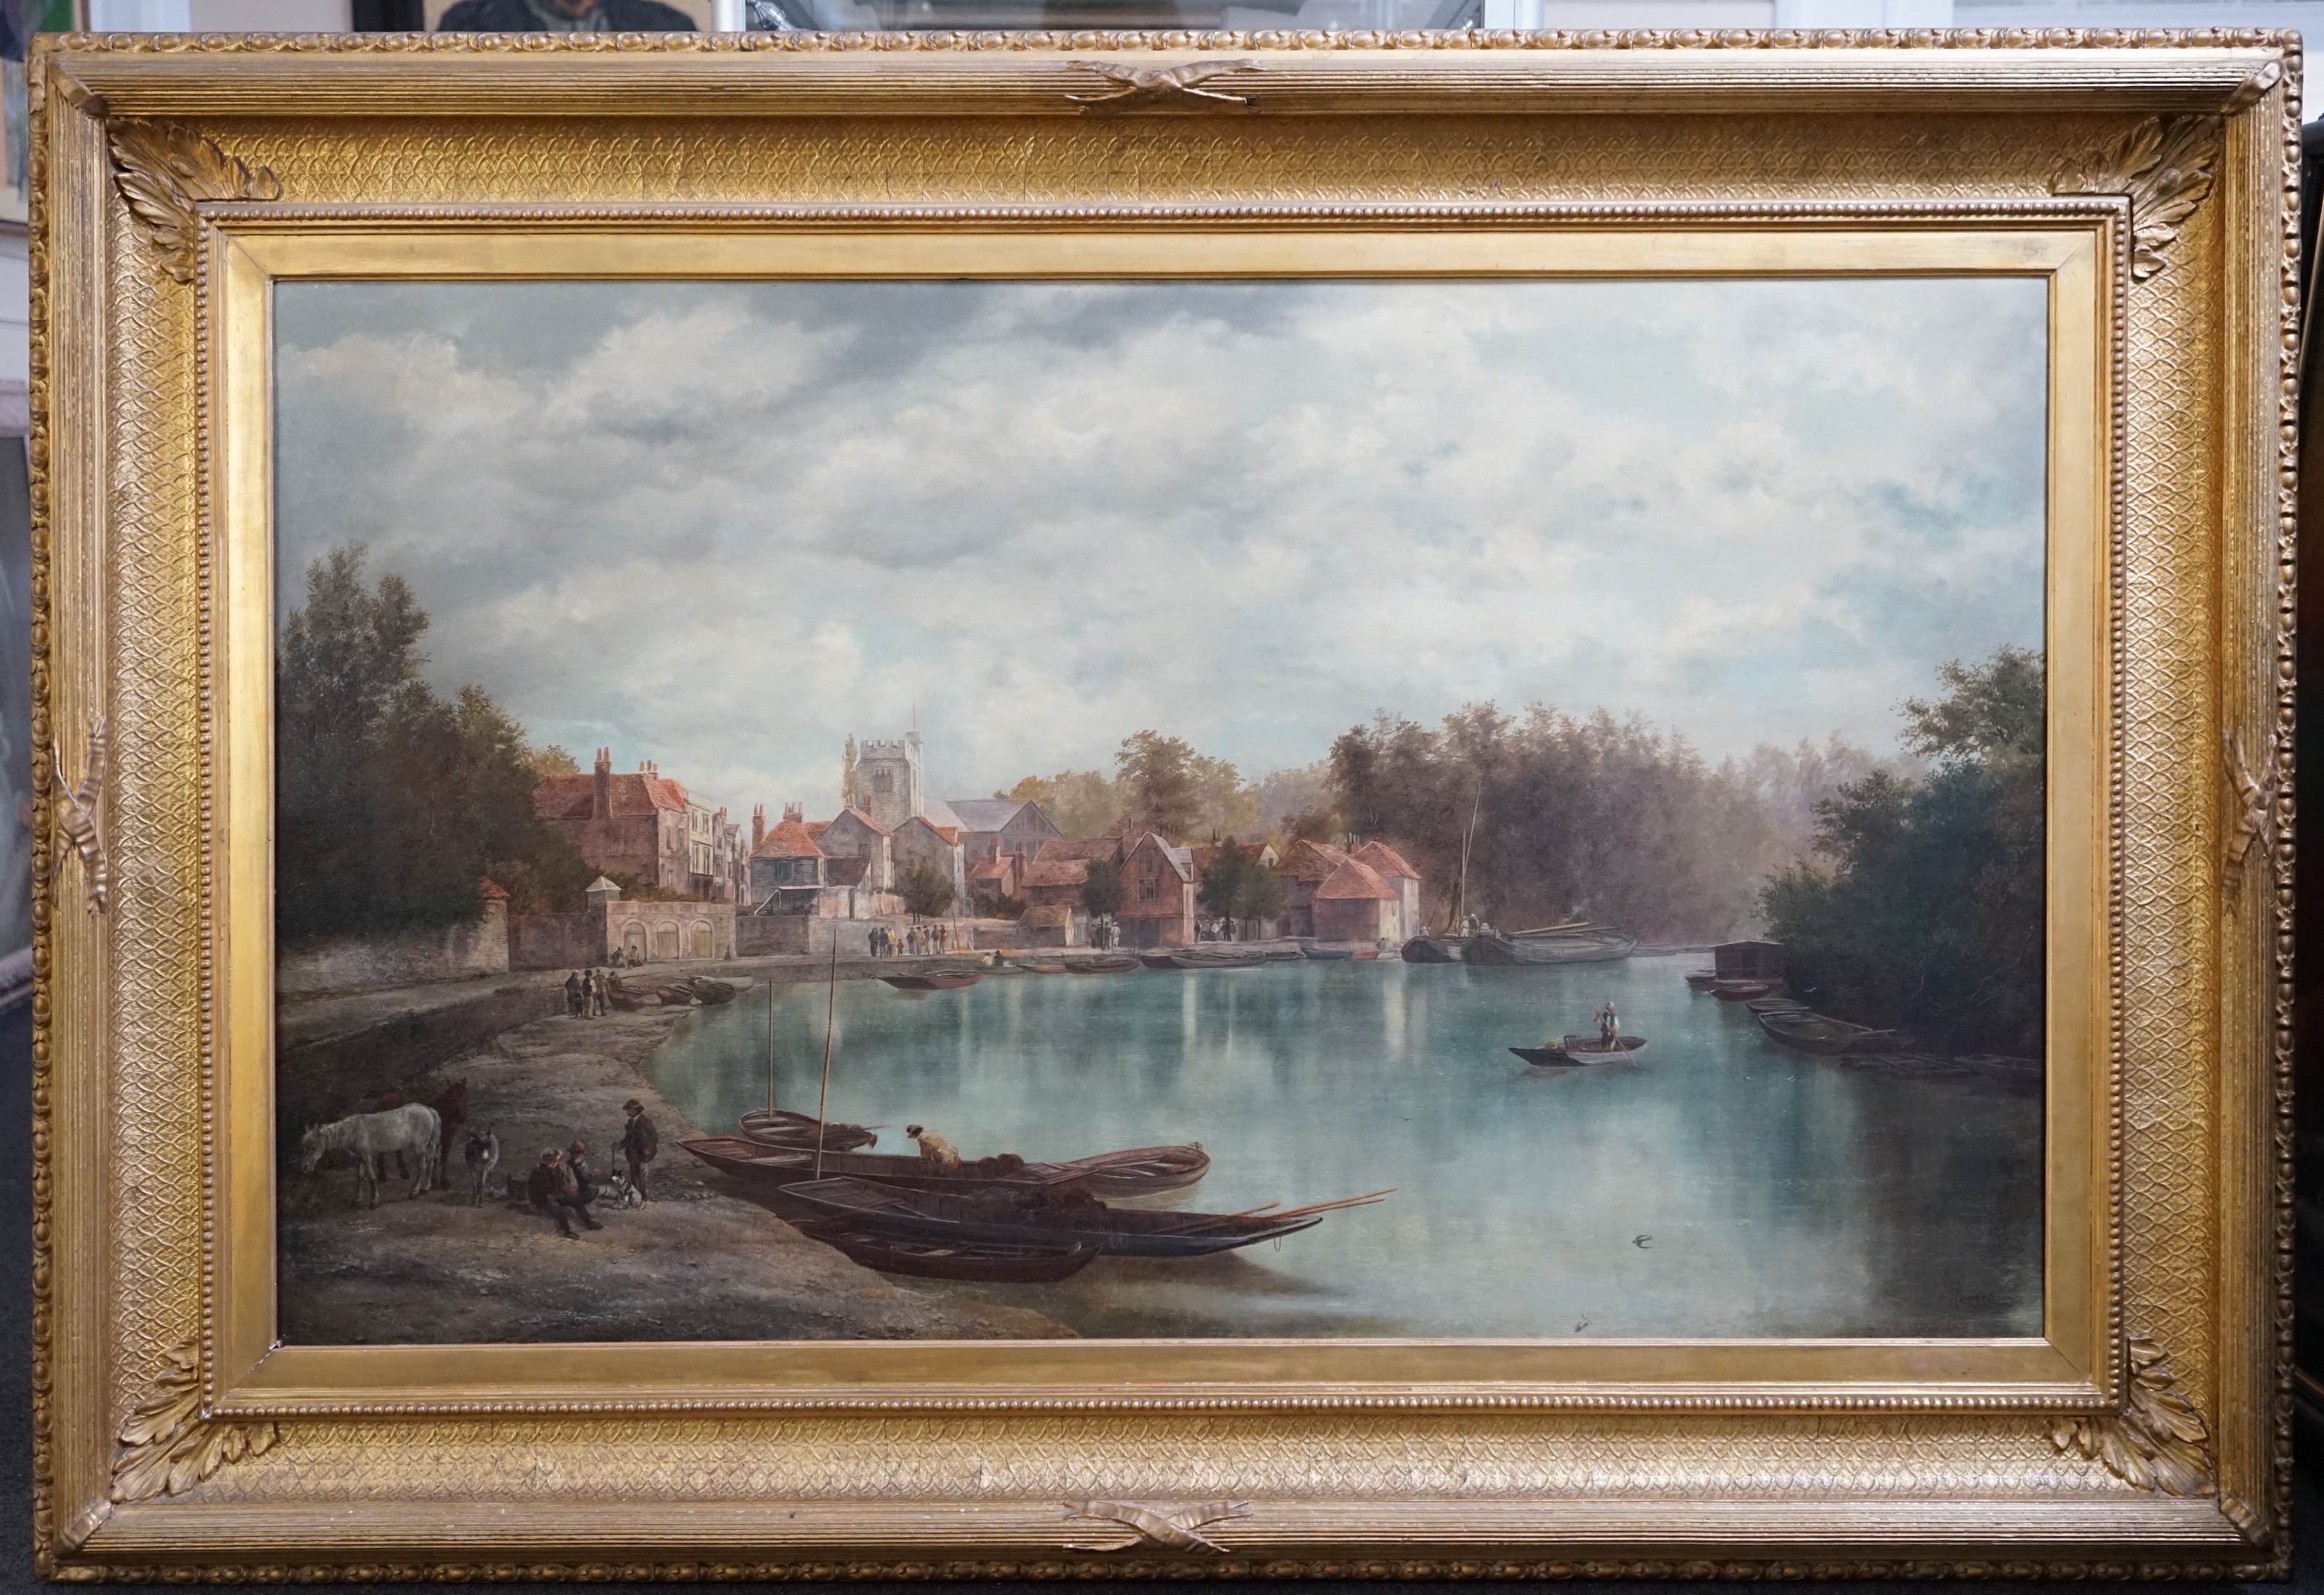 William Howard (British, 1800-1850), Twickenham viewed from the river, oil on canvas, 75 x 125cm